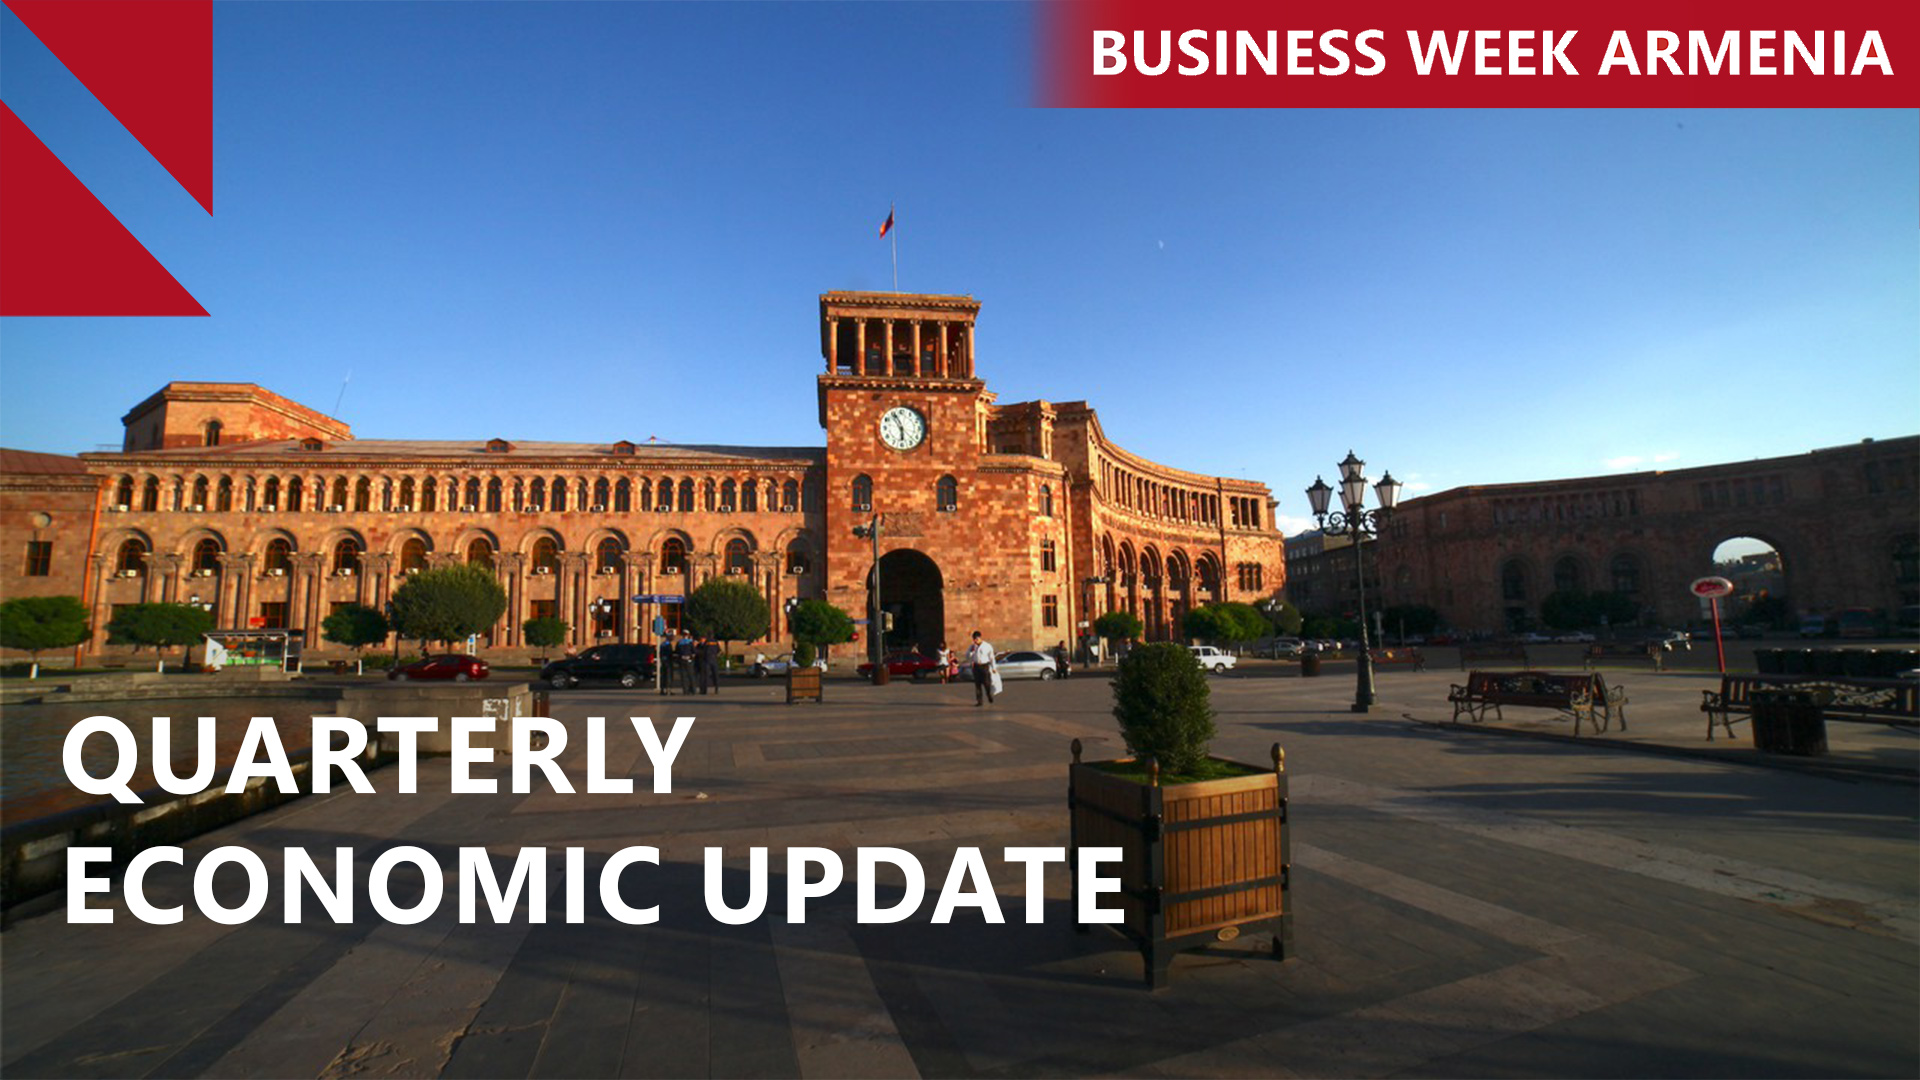 Armenia tax revenues up 17%: THIS WEEK IN BUSINESS